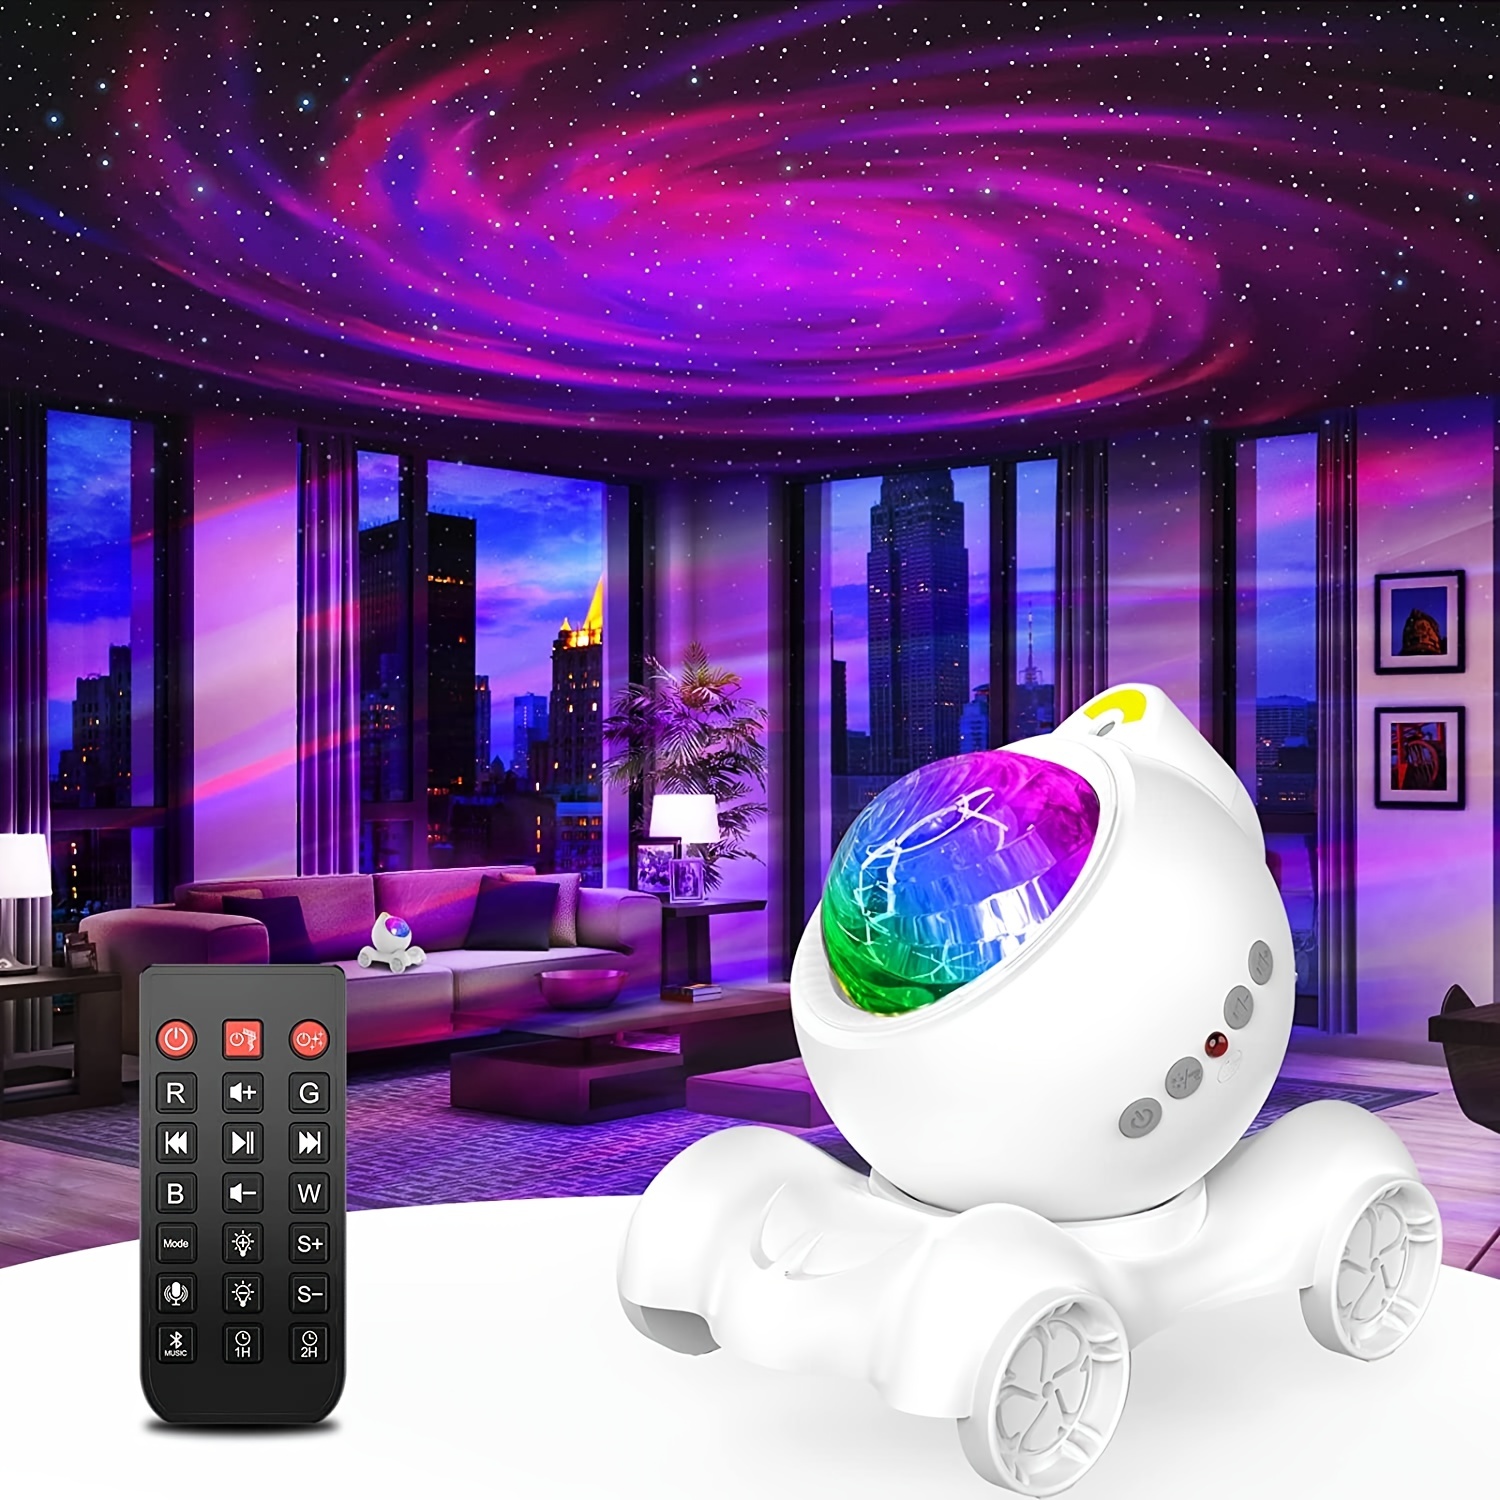 Buy LED Star Projector Galaxy Projector Light with White Noise